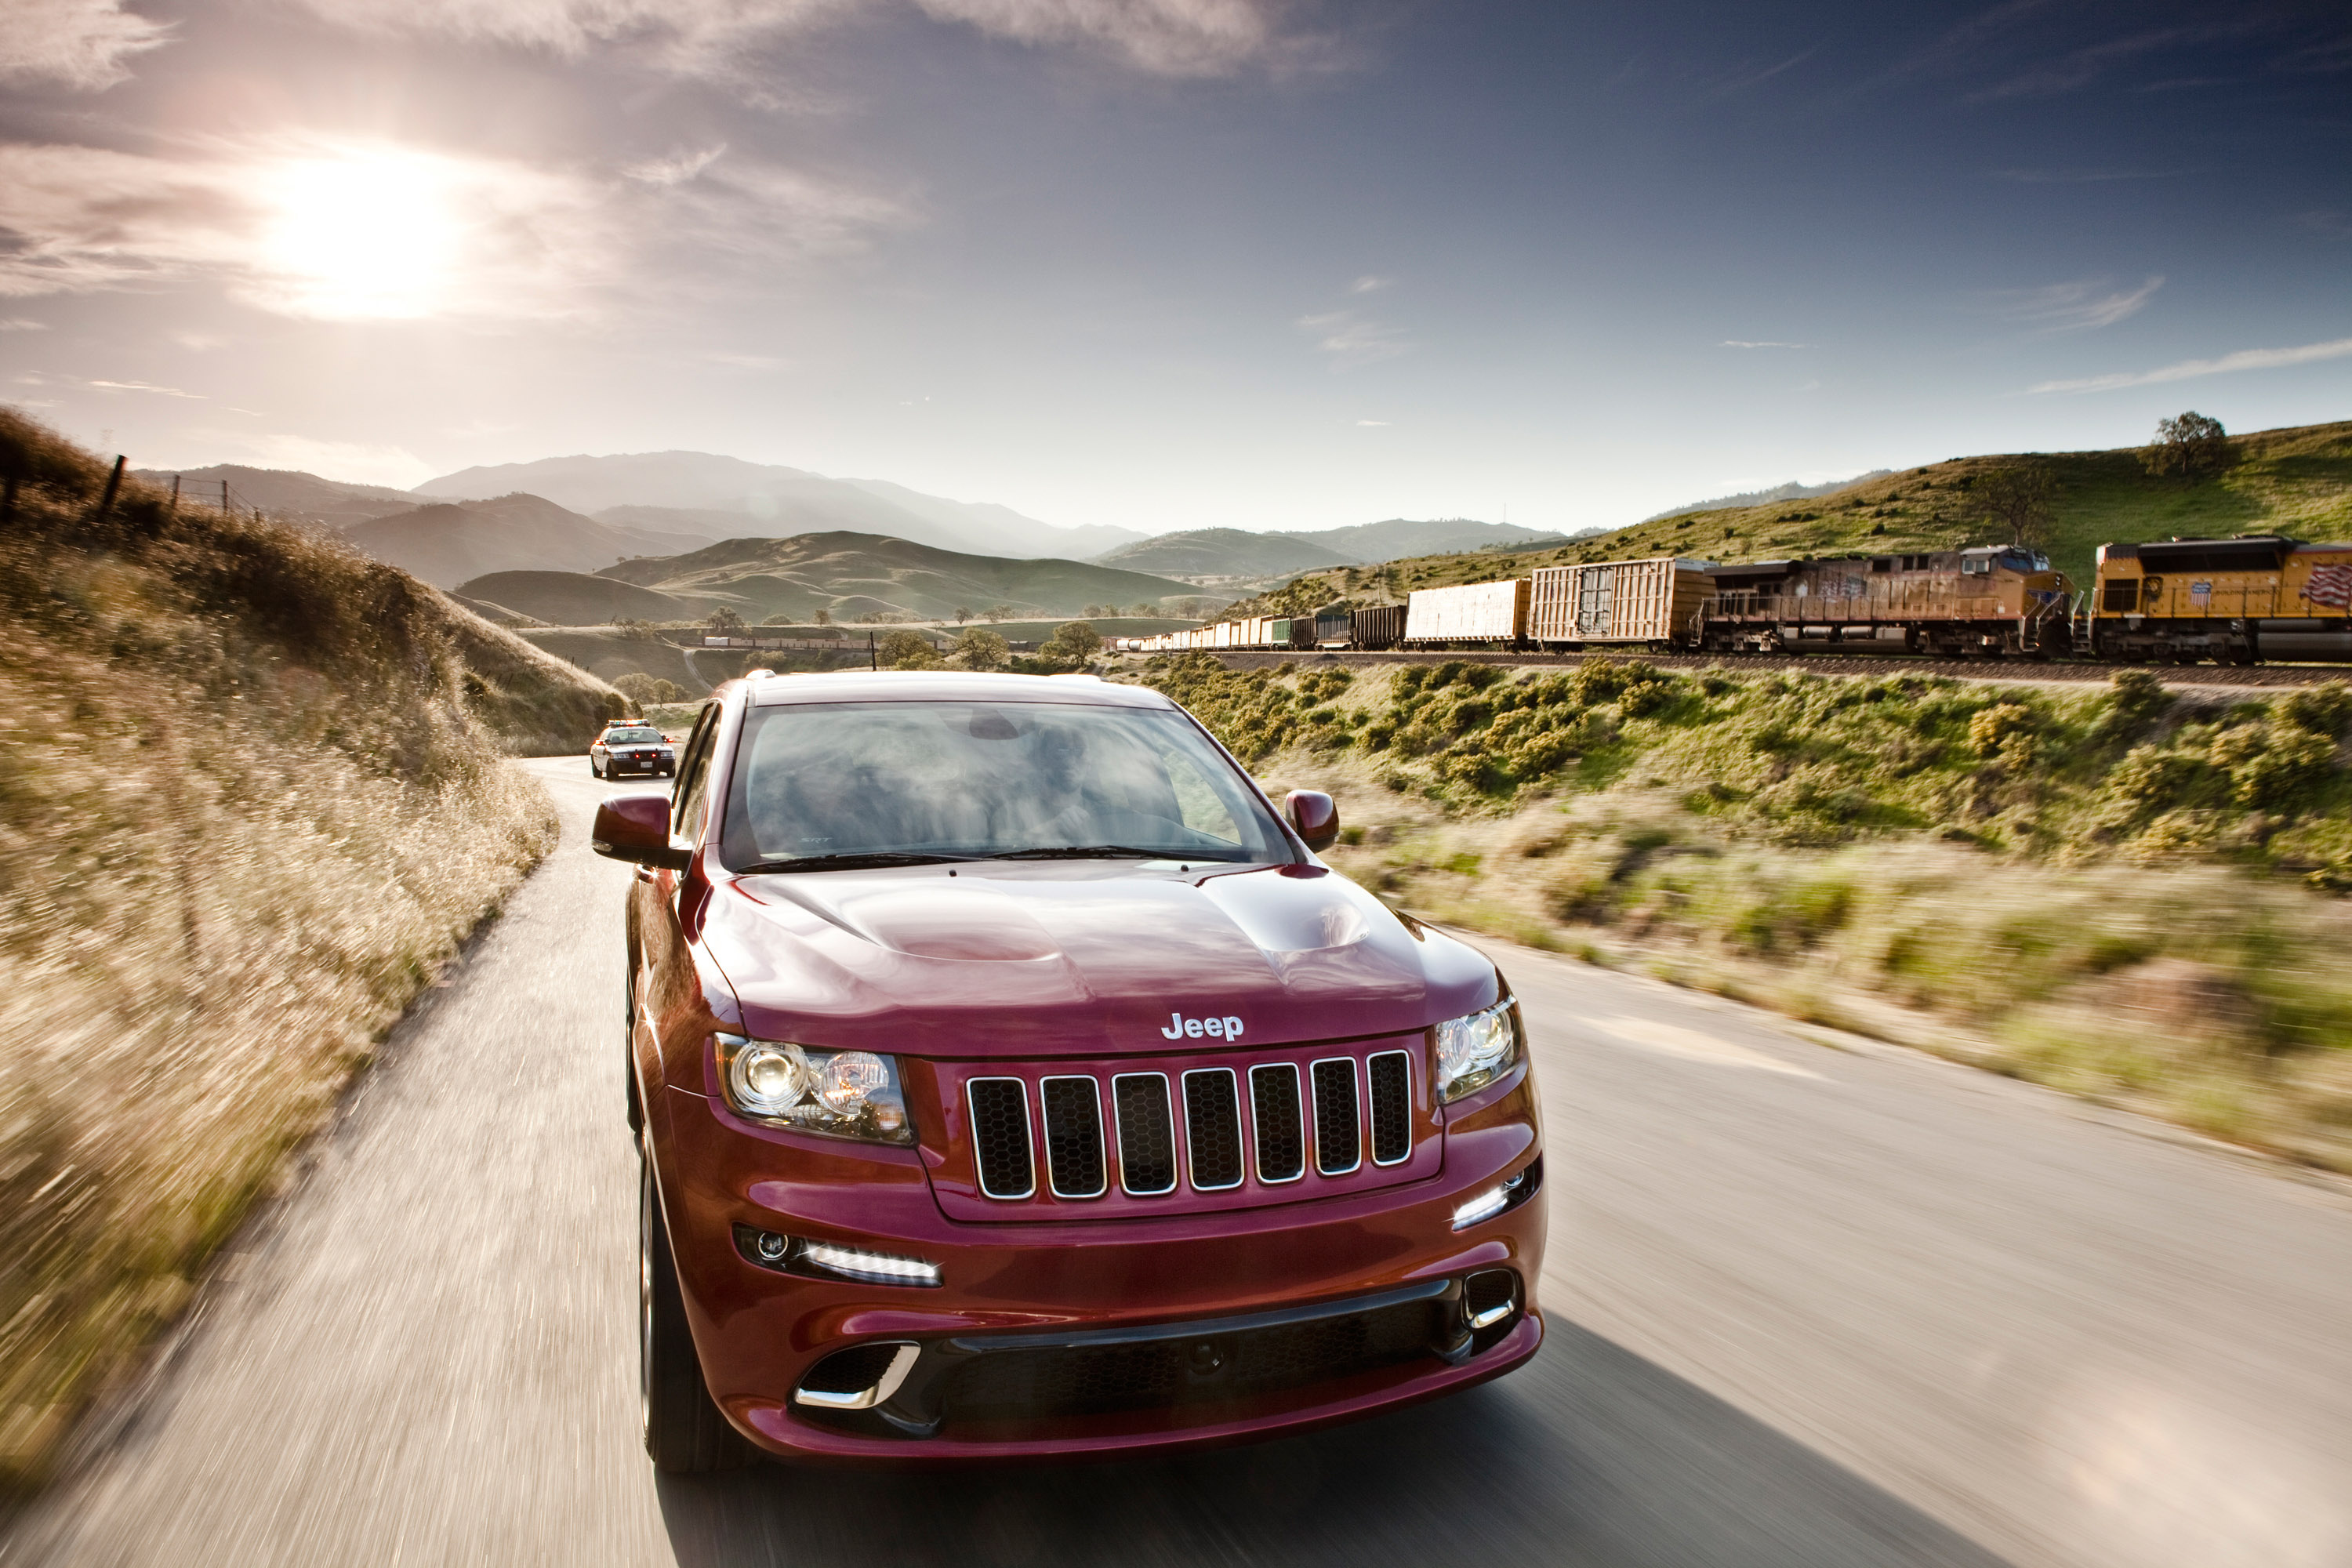 Jeep Cherokee, SRT8 power, High-definition picture, SUV perfection, 3000x2000 HD Desktop